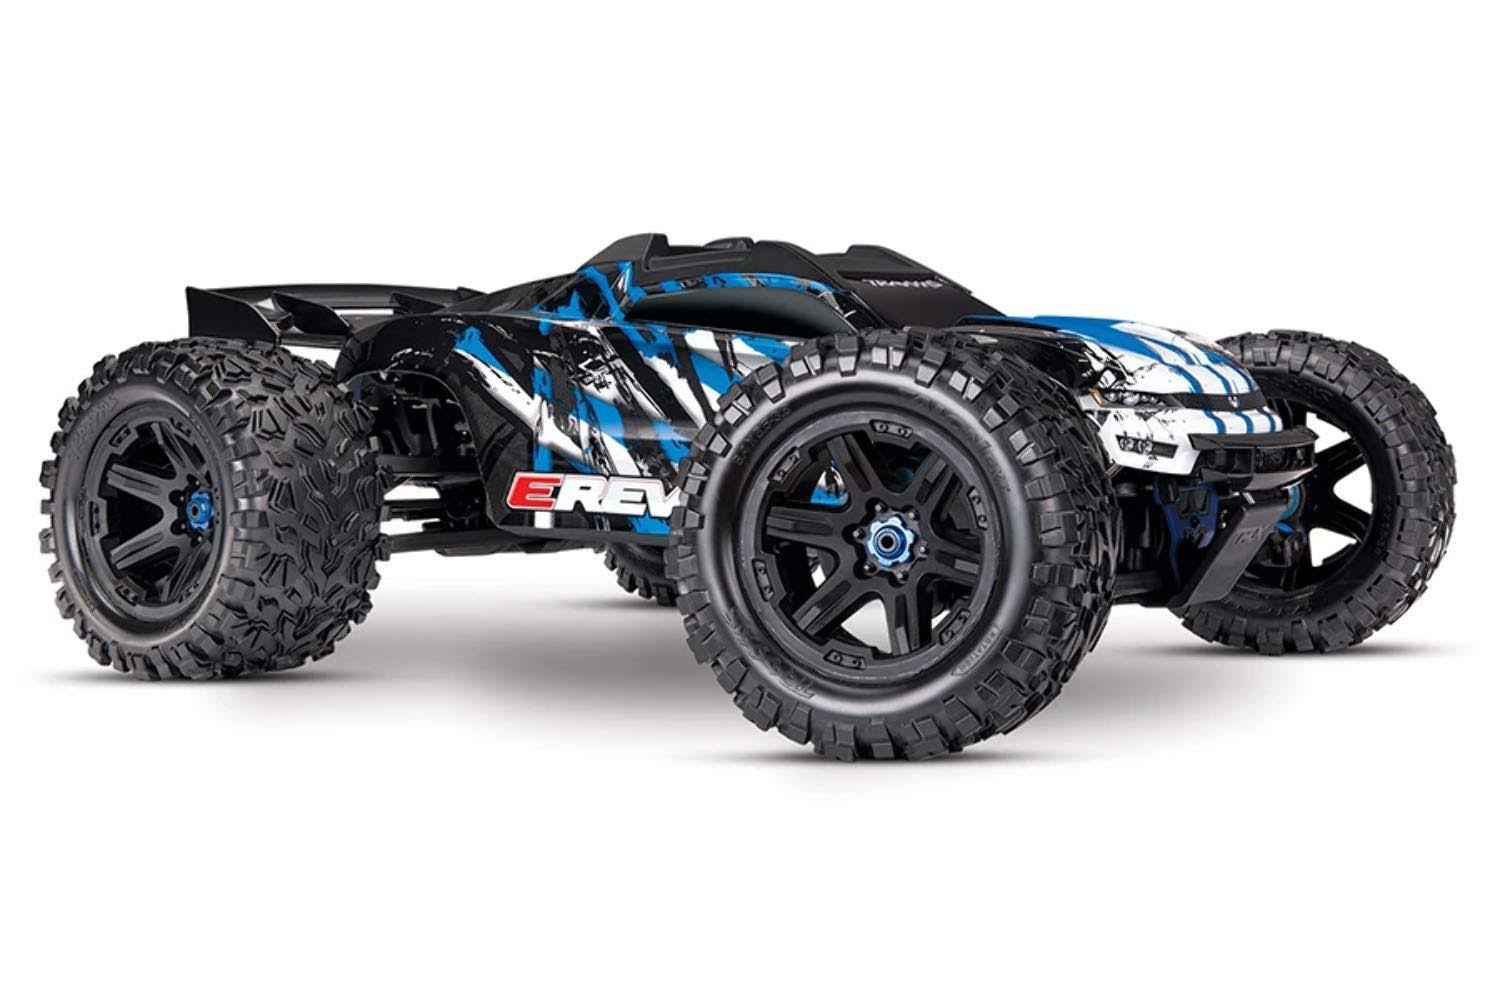 Traxxas E-Revo 2 VXL Brushless: 1/10 Scale 4WD Brushless Electric Monster Truck with TQi 2.4GHz Traxxas Link Enabled Radio System, Velineon VXL-6s